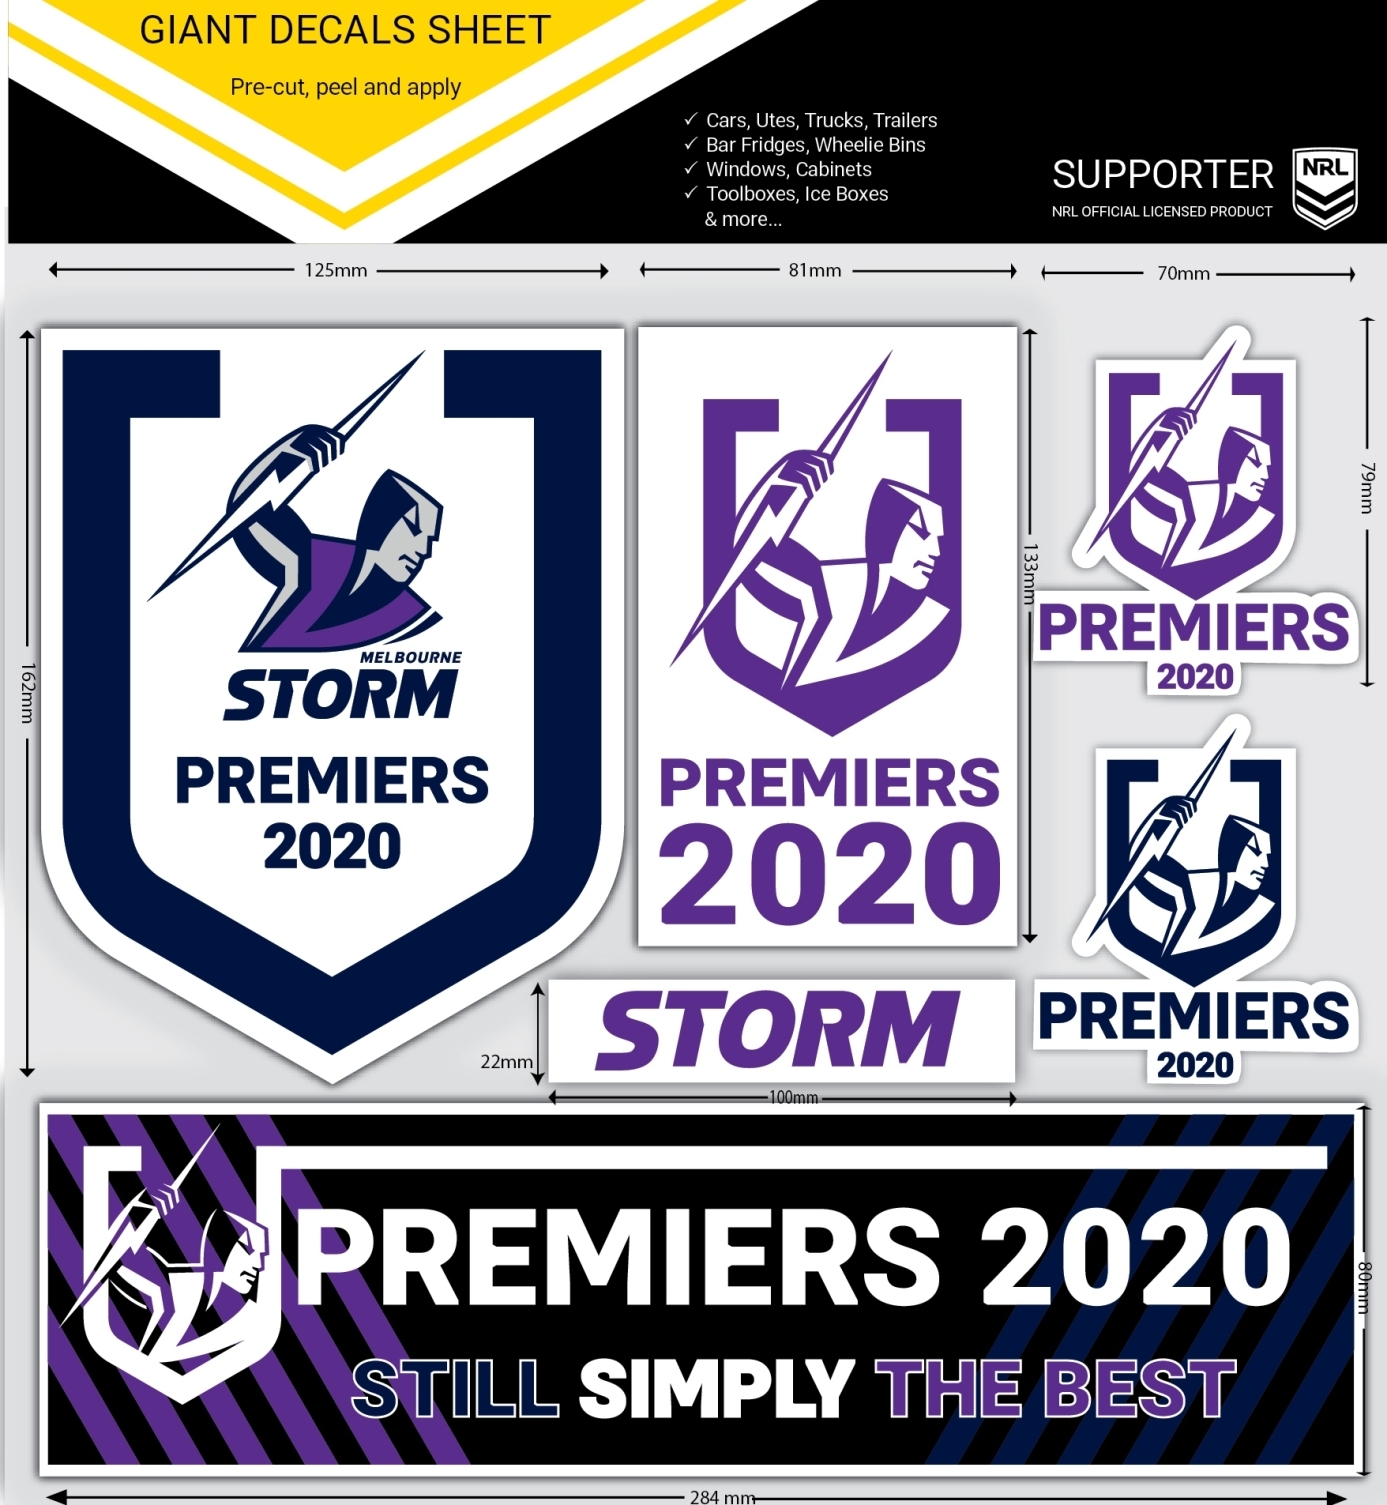 Storm Premiers Giant Decals Sheet